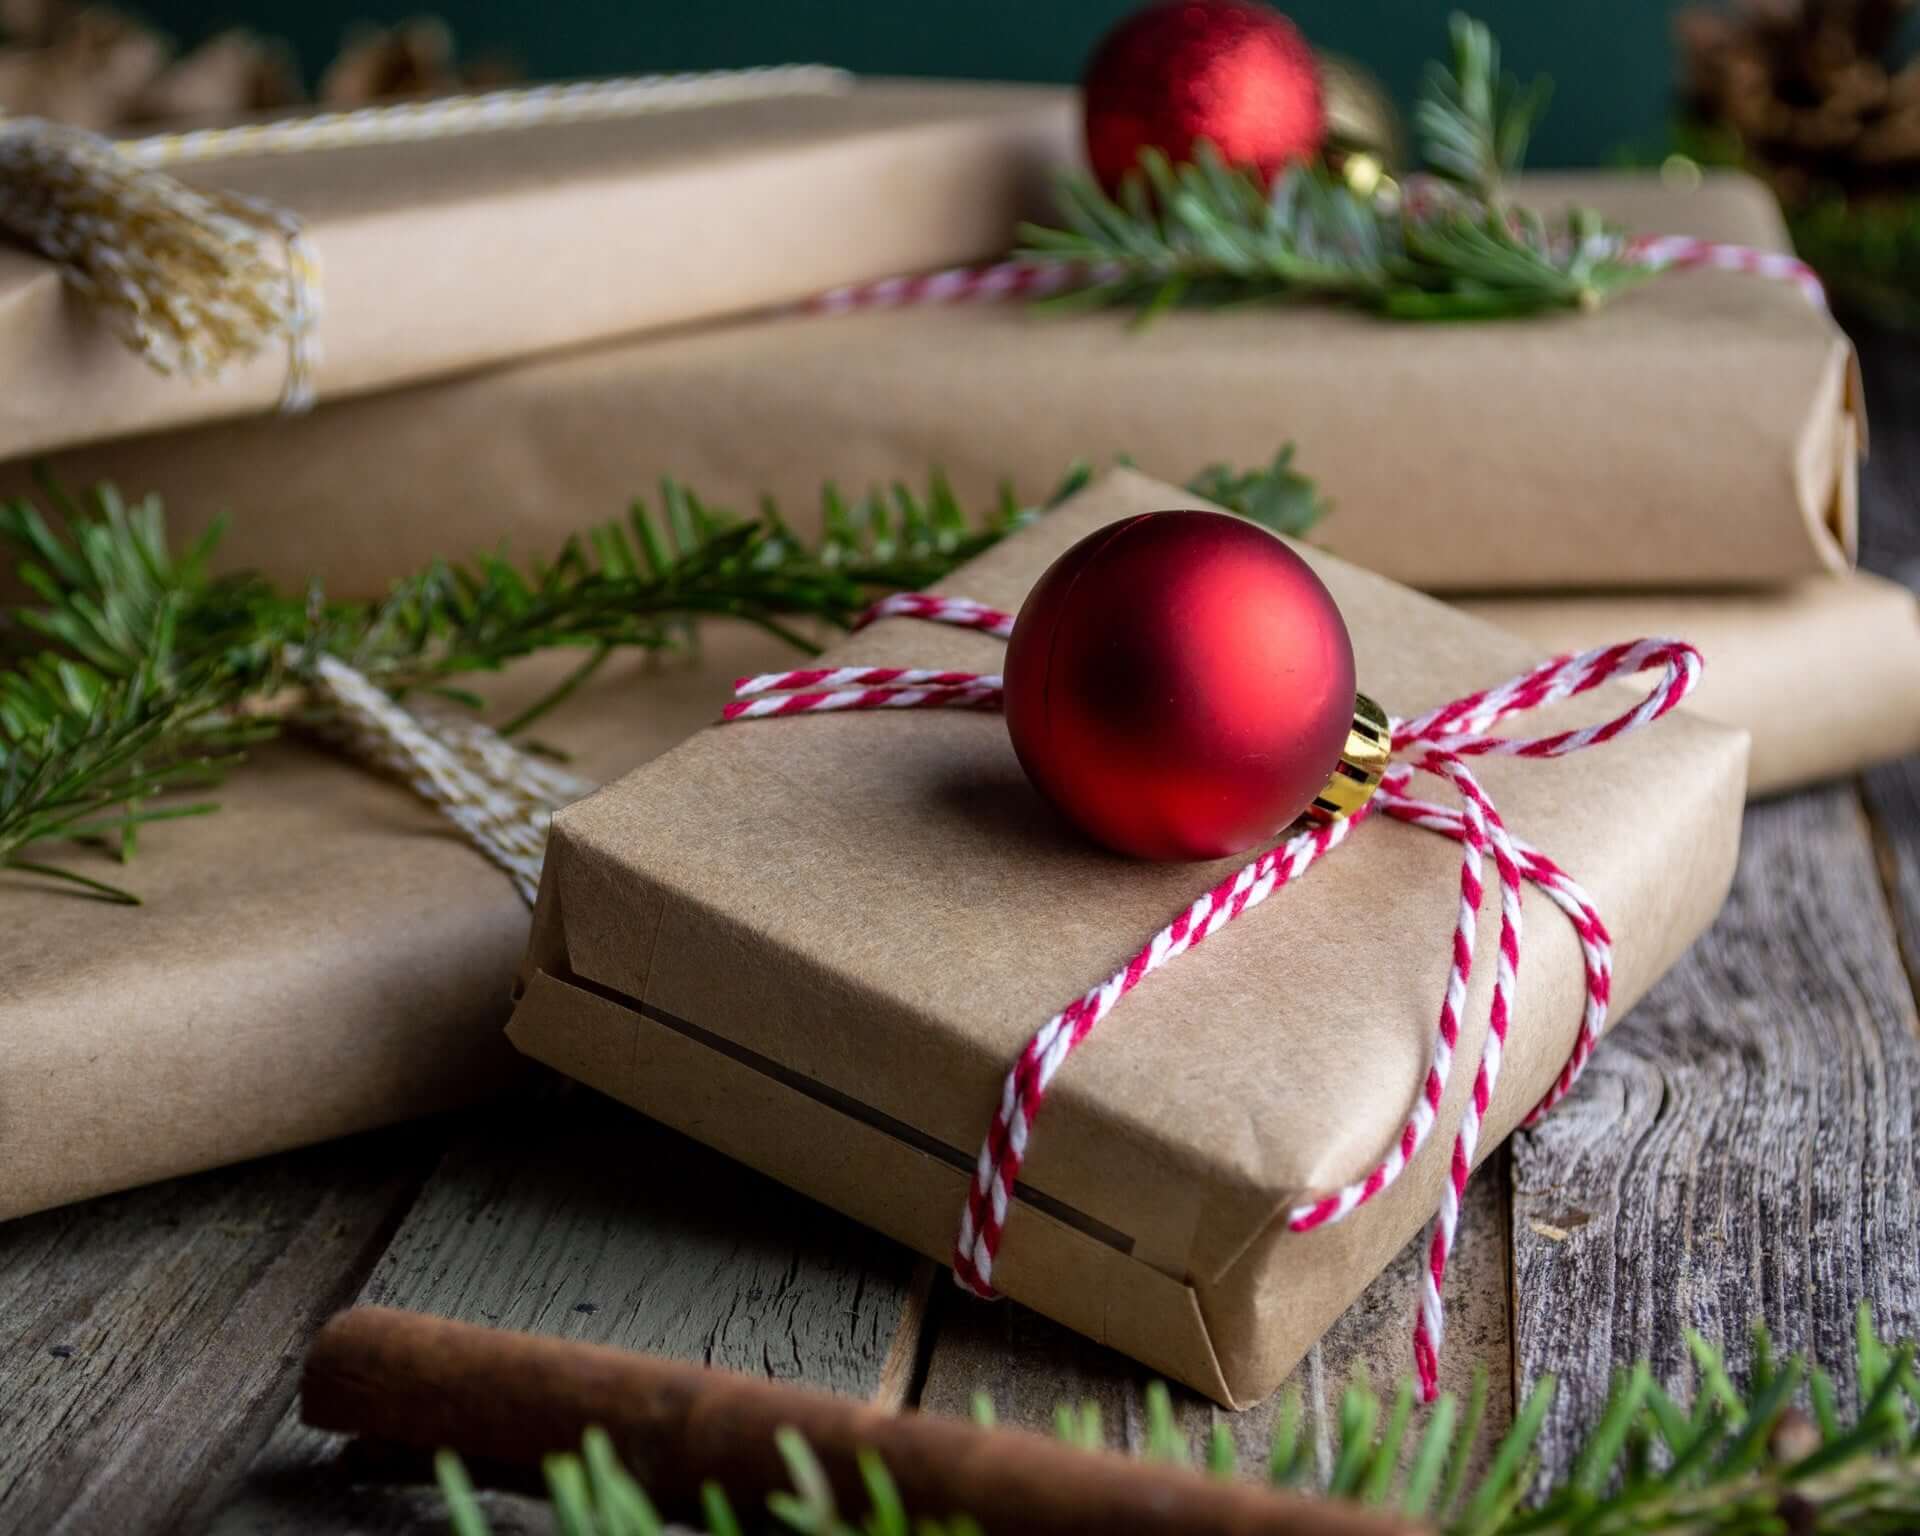 Brown paper wrapped presents with red and white string tied around them, decorated with red Christmas baubles.